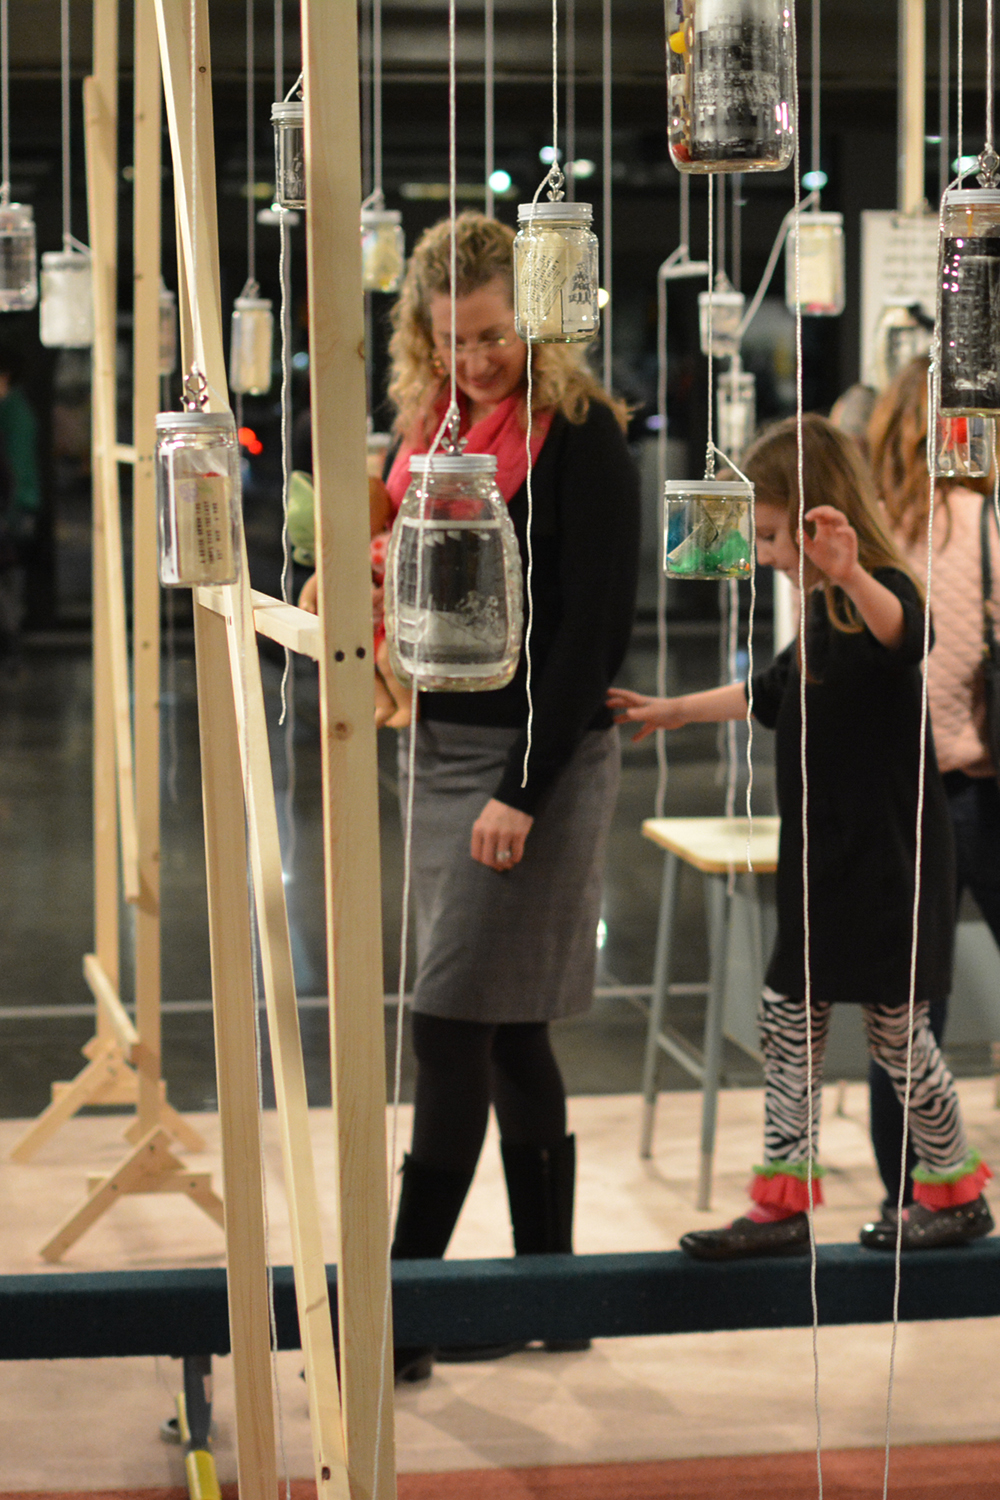 View of the Installation during the Opening Reception, and a visitors walking on the balance beam.